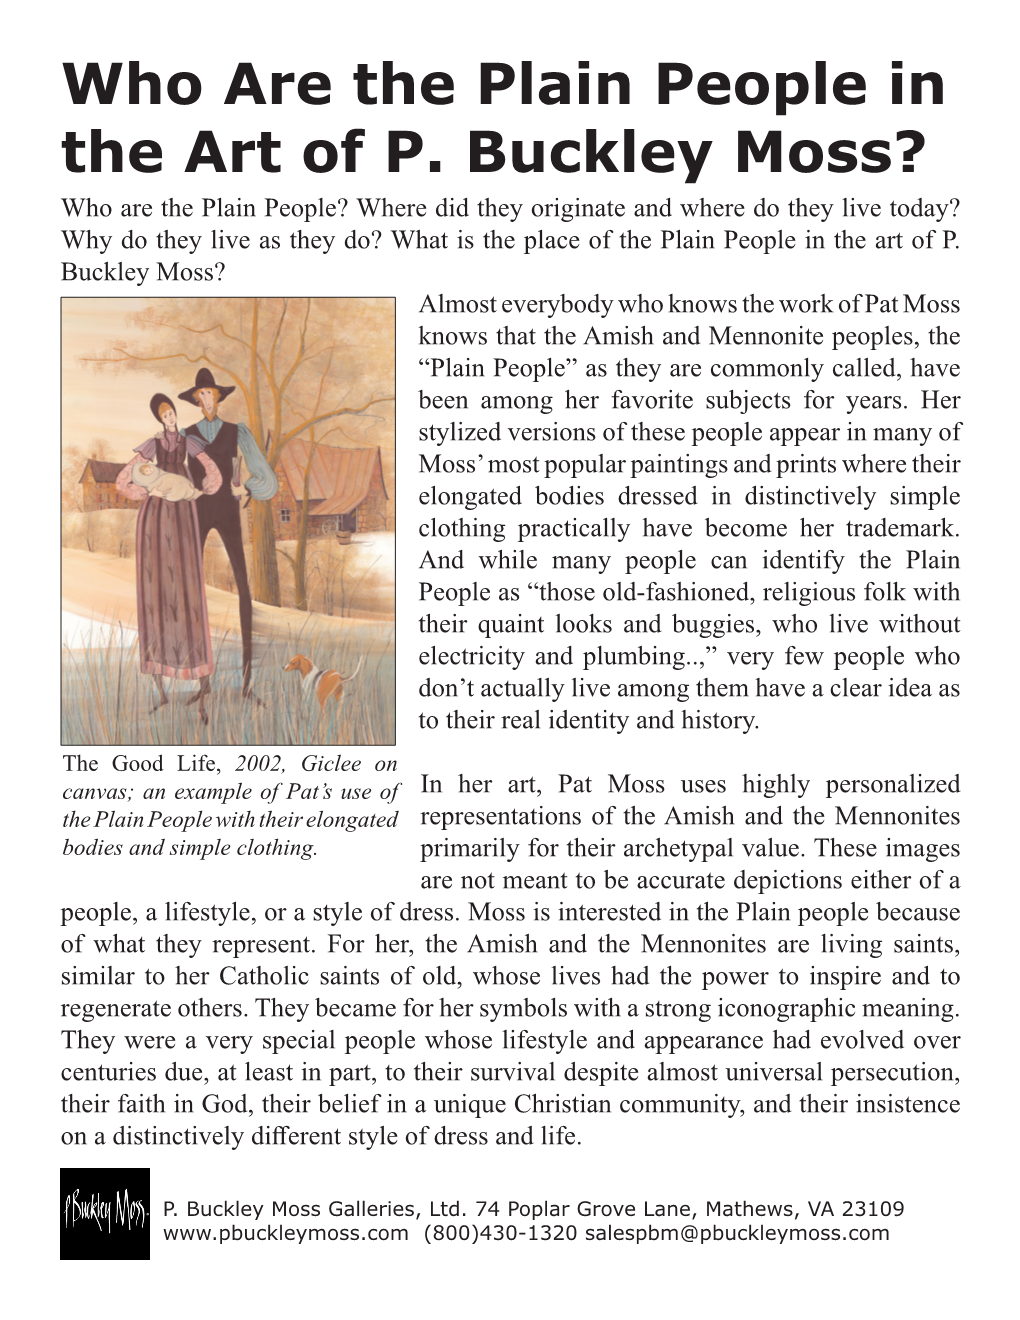 Who Are the Plain People in the Art of P. Buckley Moss?